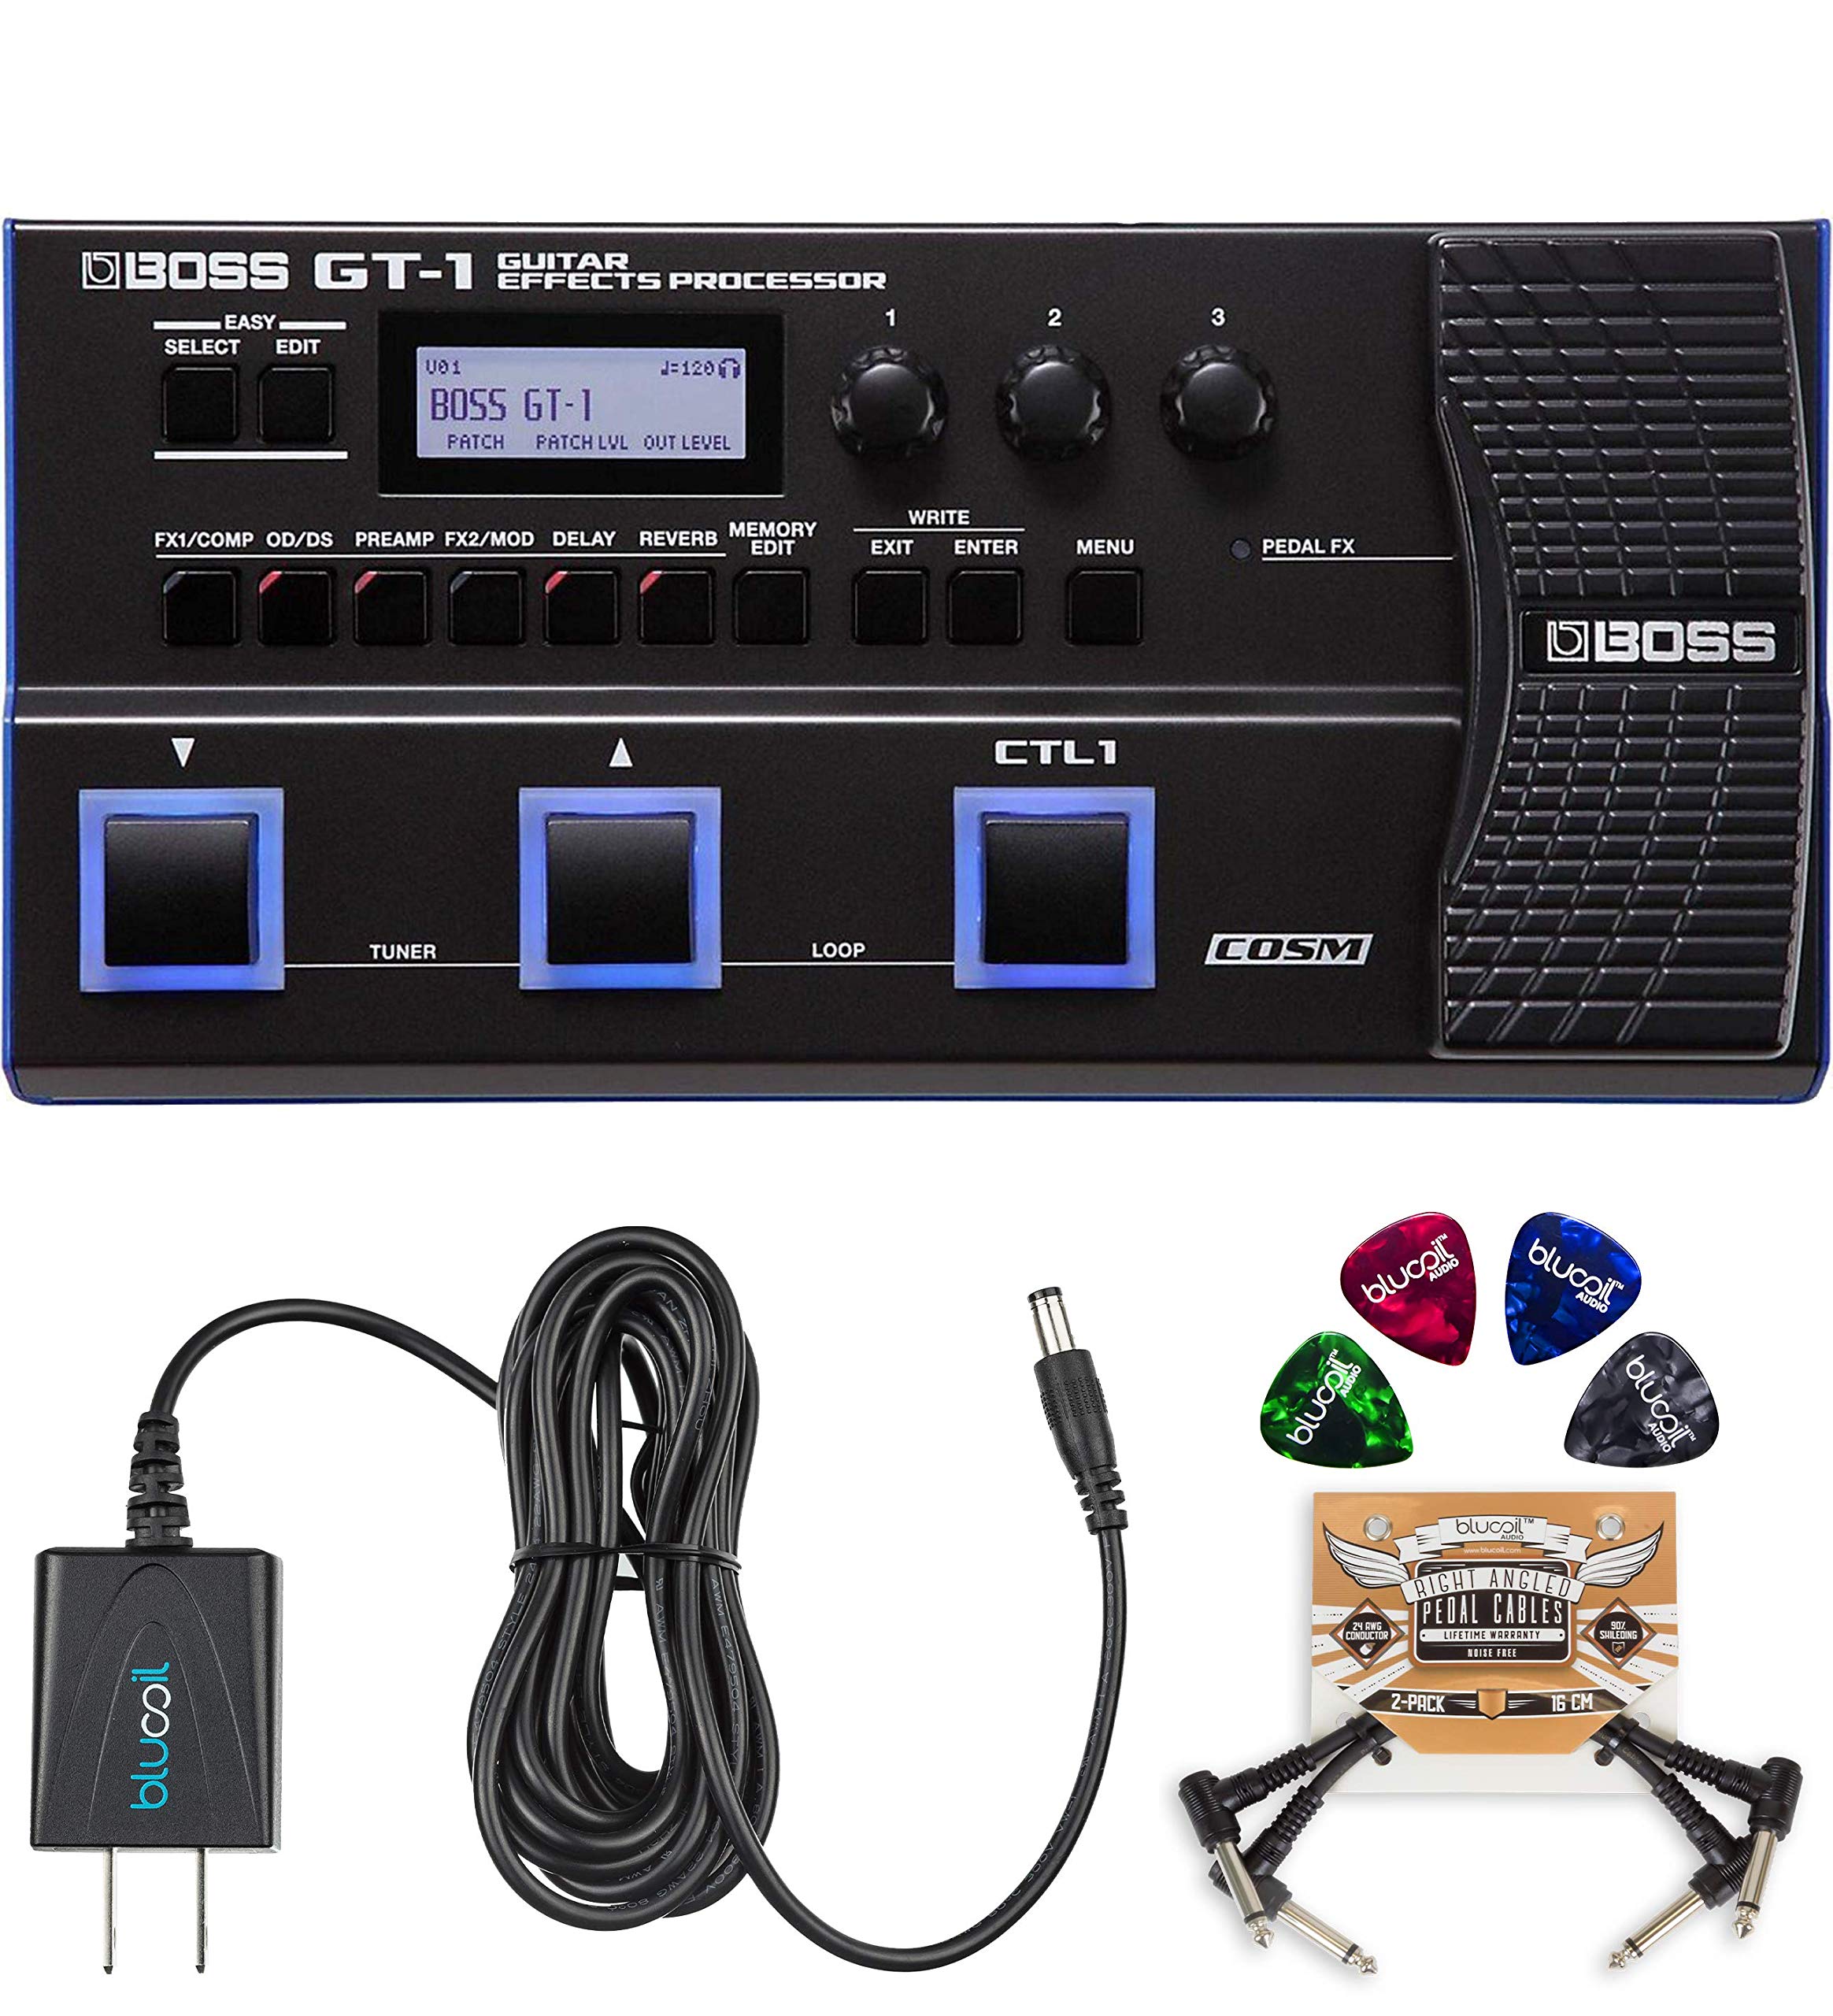 Mua BOSS GT-1 Guitar Multi-Effects Processor Bundle with BOSS Tone Studio,  Blucoil 9V DC Power Supply, 2-Pack of Pedal Patch Cables, and 4-Pack of  Celluloid Guitar Picks trên Amazon Mỹ chính hãng